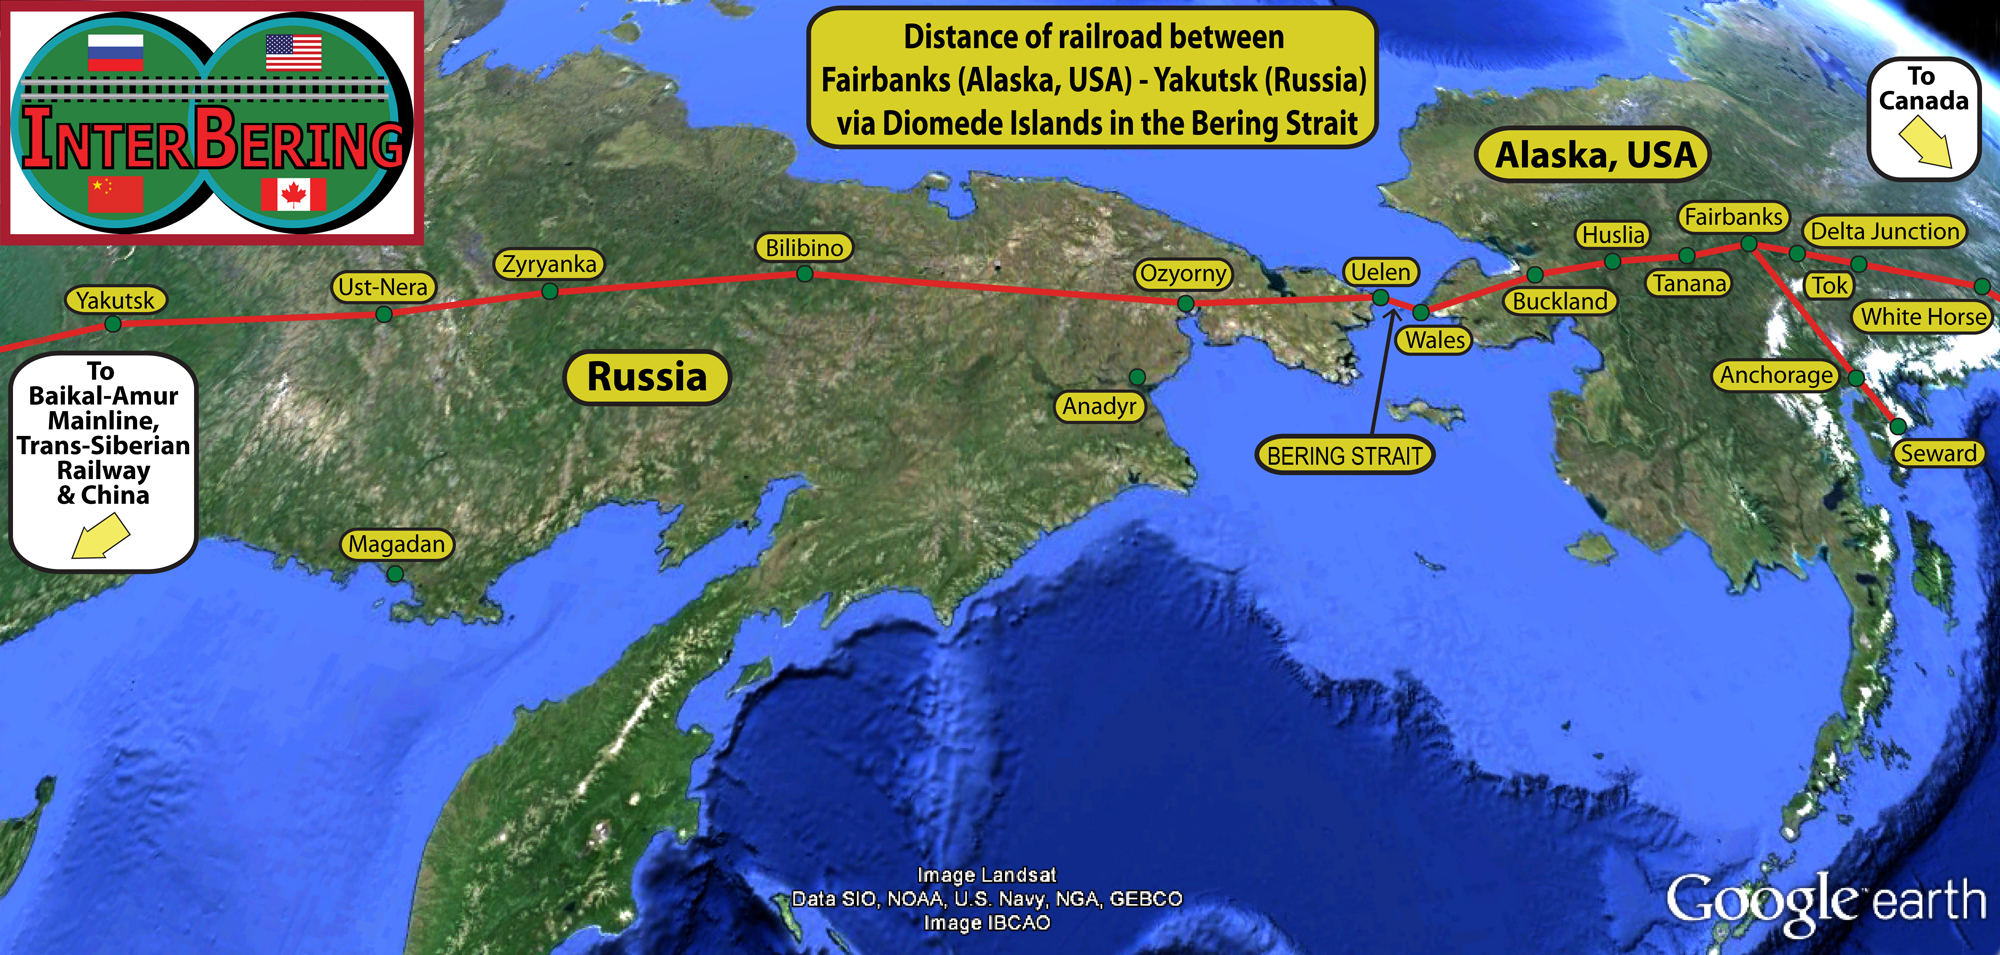 Map of proposed railroad from Fairbanks (Alaska) to Yakutsk (Russia) via tunnel under the Bering Strait.